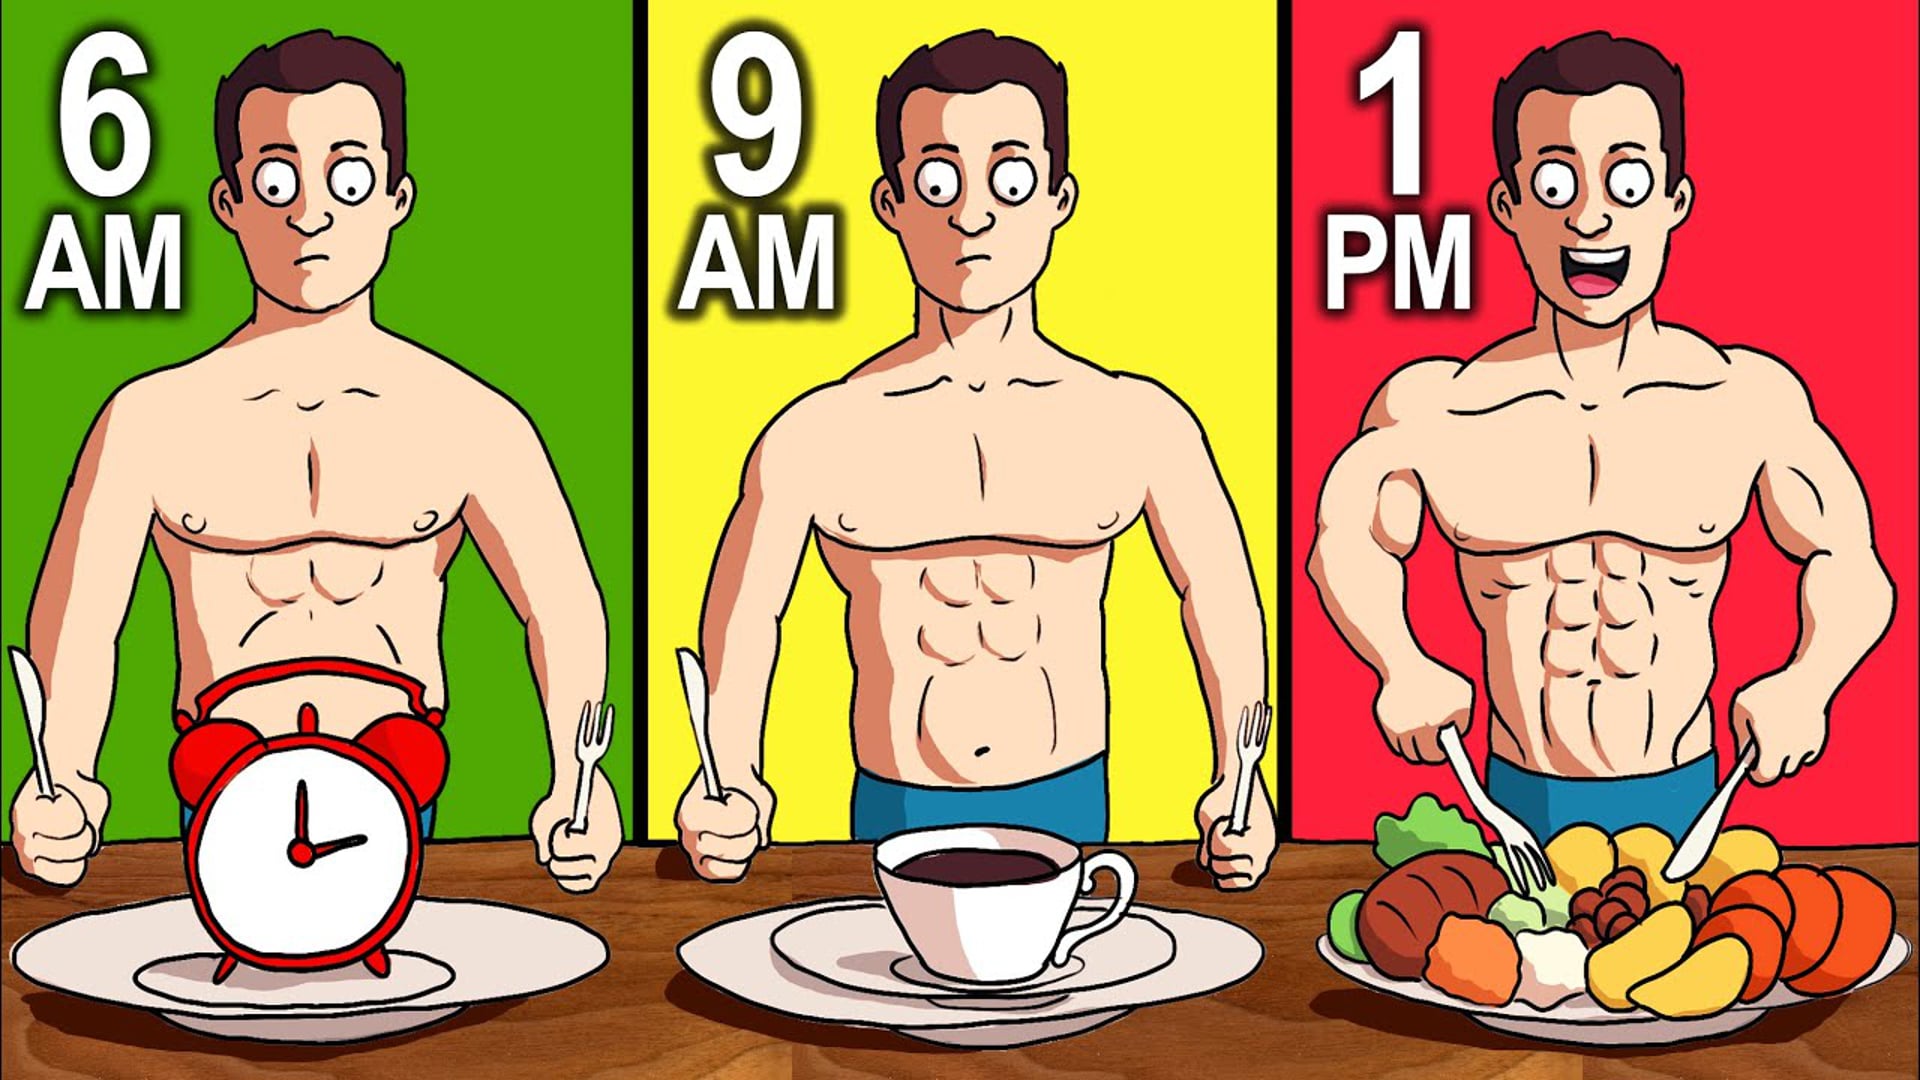 Intermittent Fasting for Weight Loss (Full Plan)